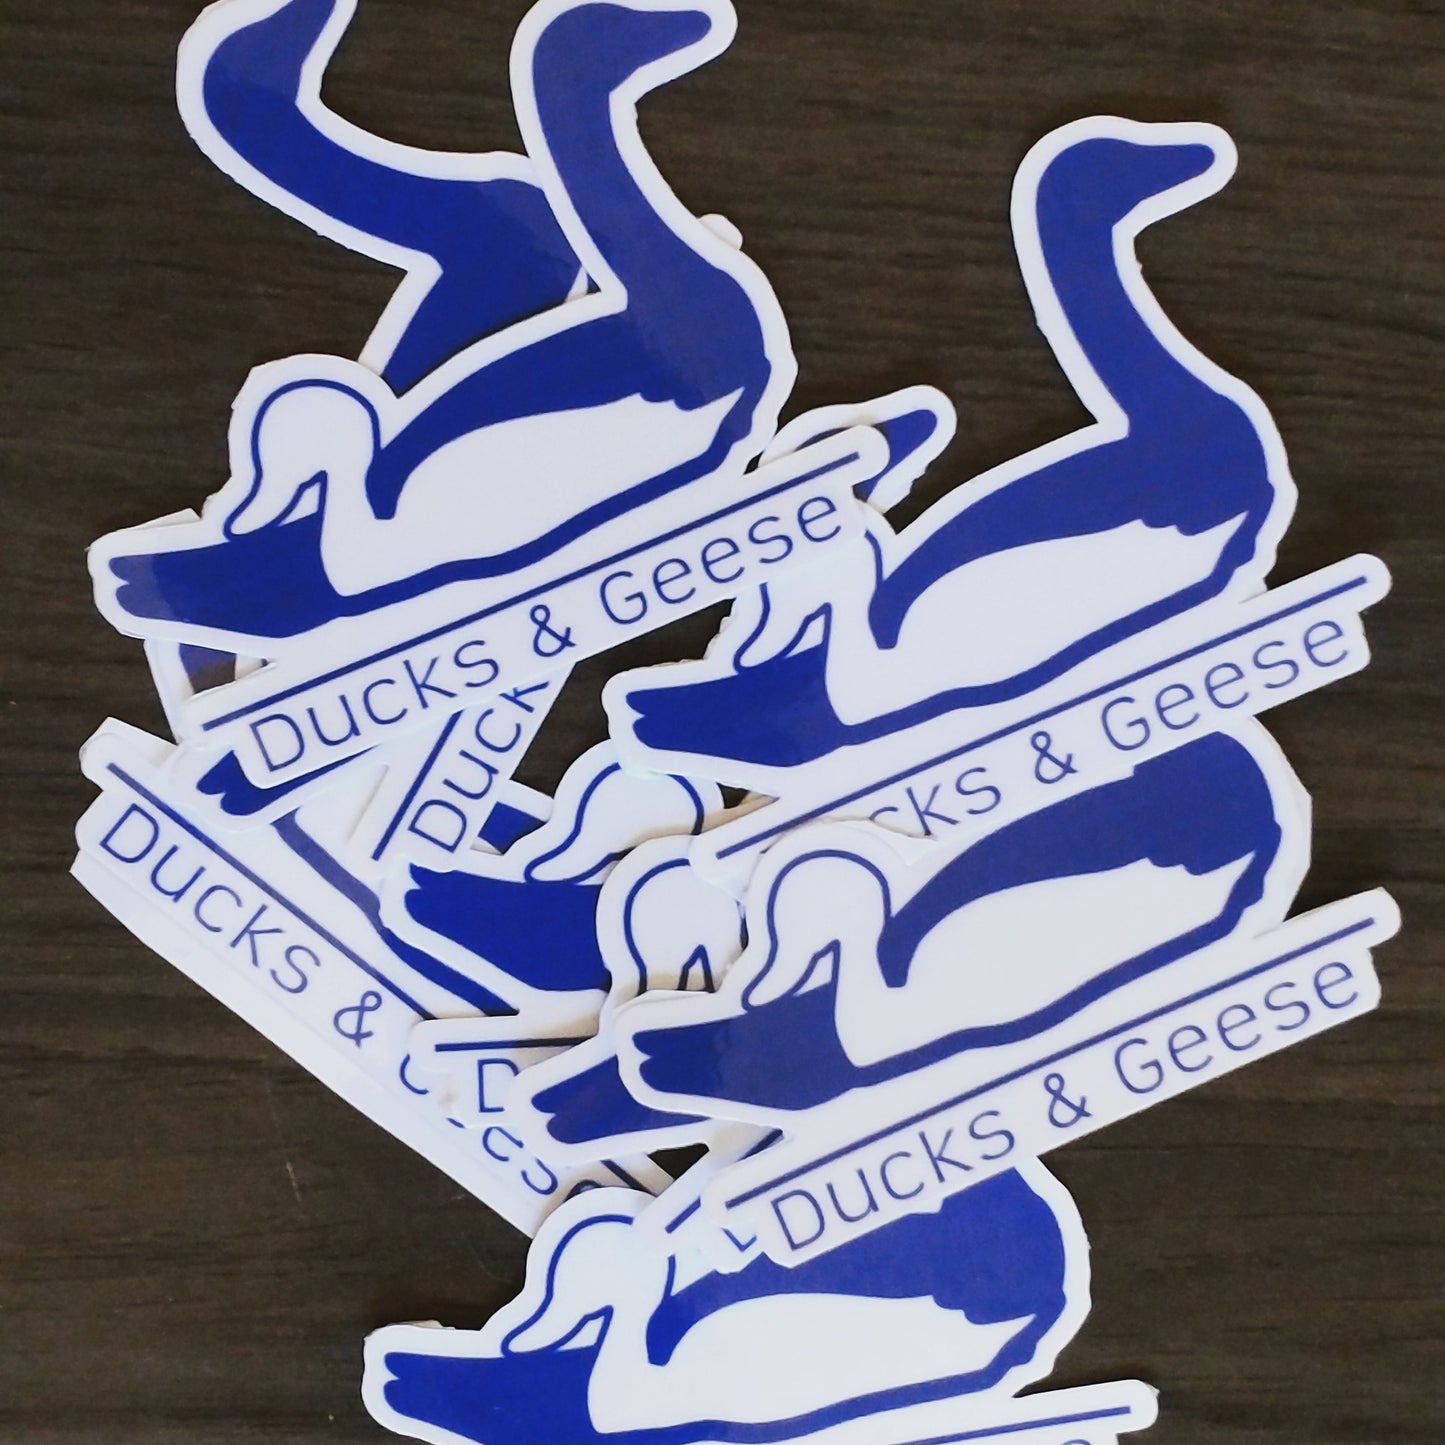 Ducks and geese stickers